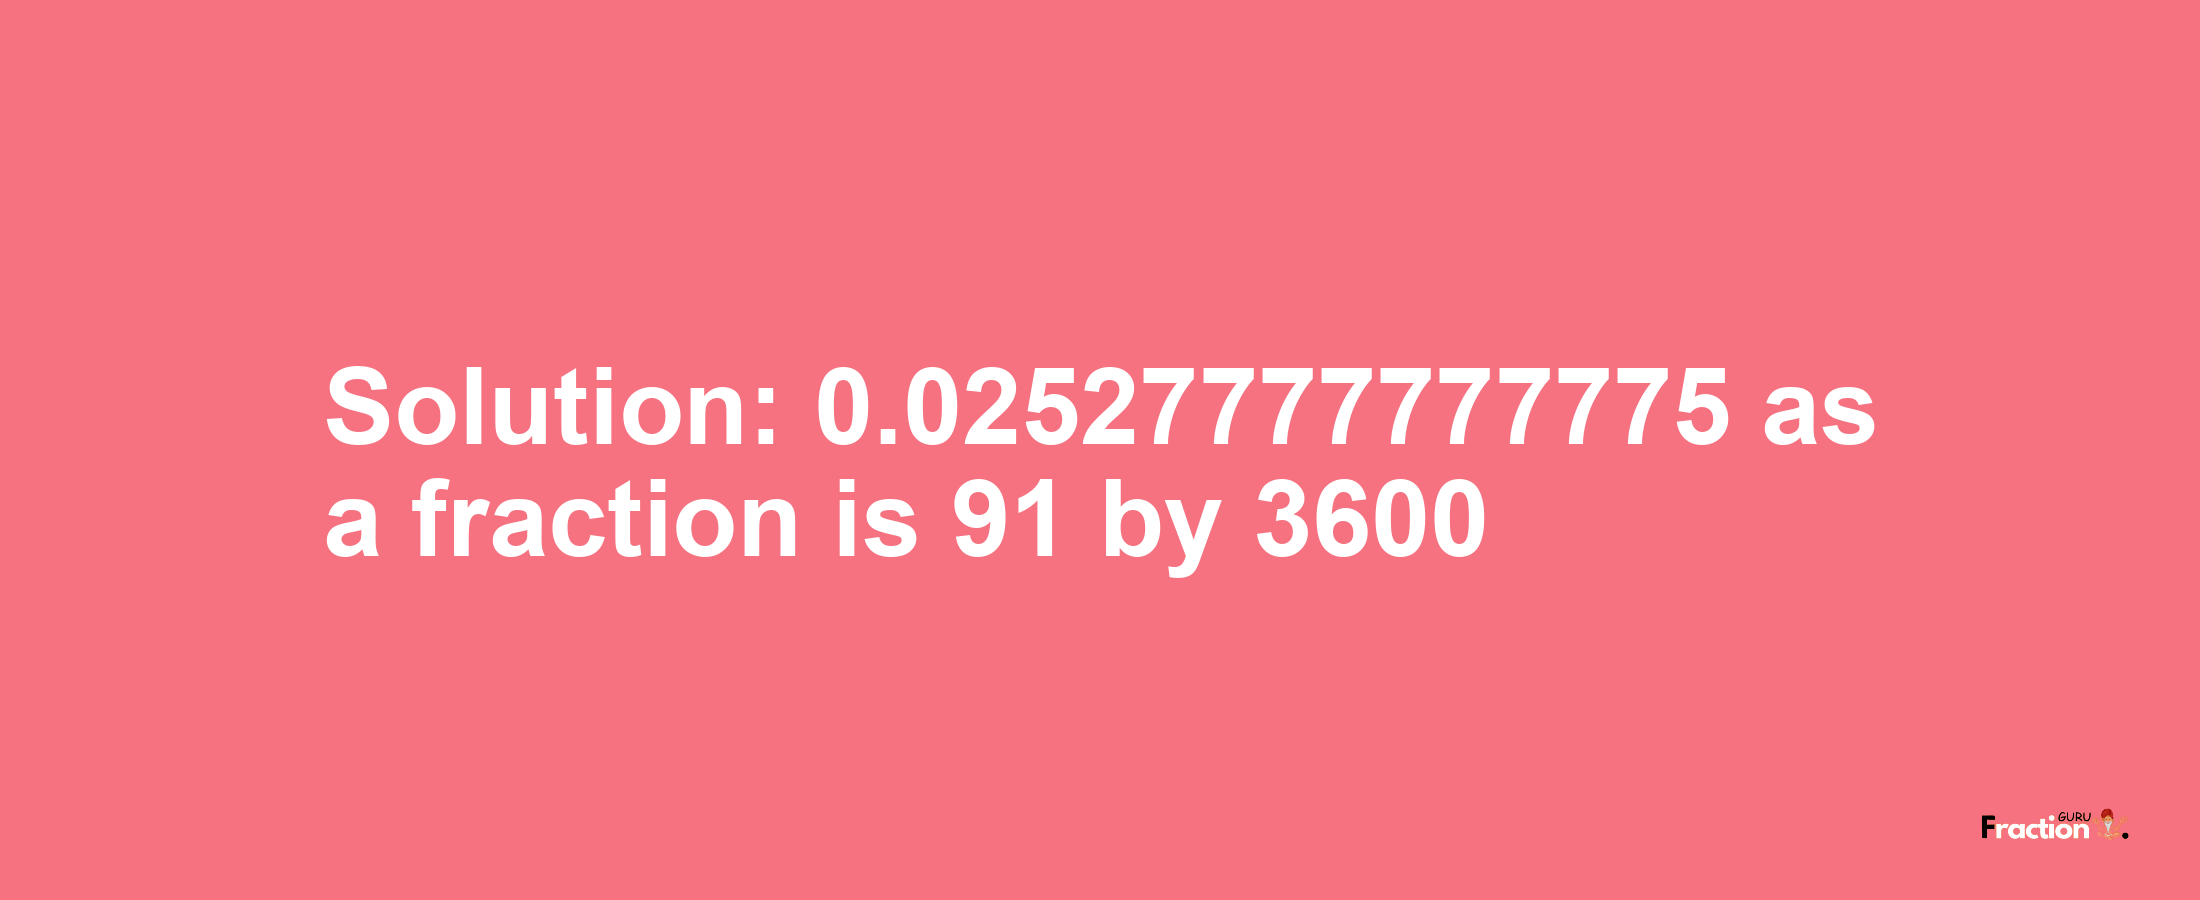 Solution:0.02527777777775 as a fraction is 91/3600